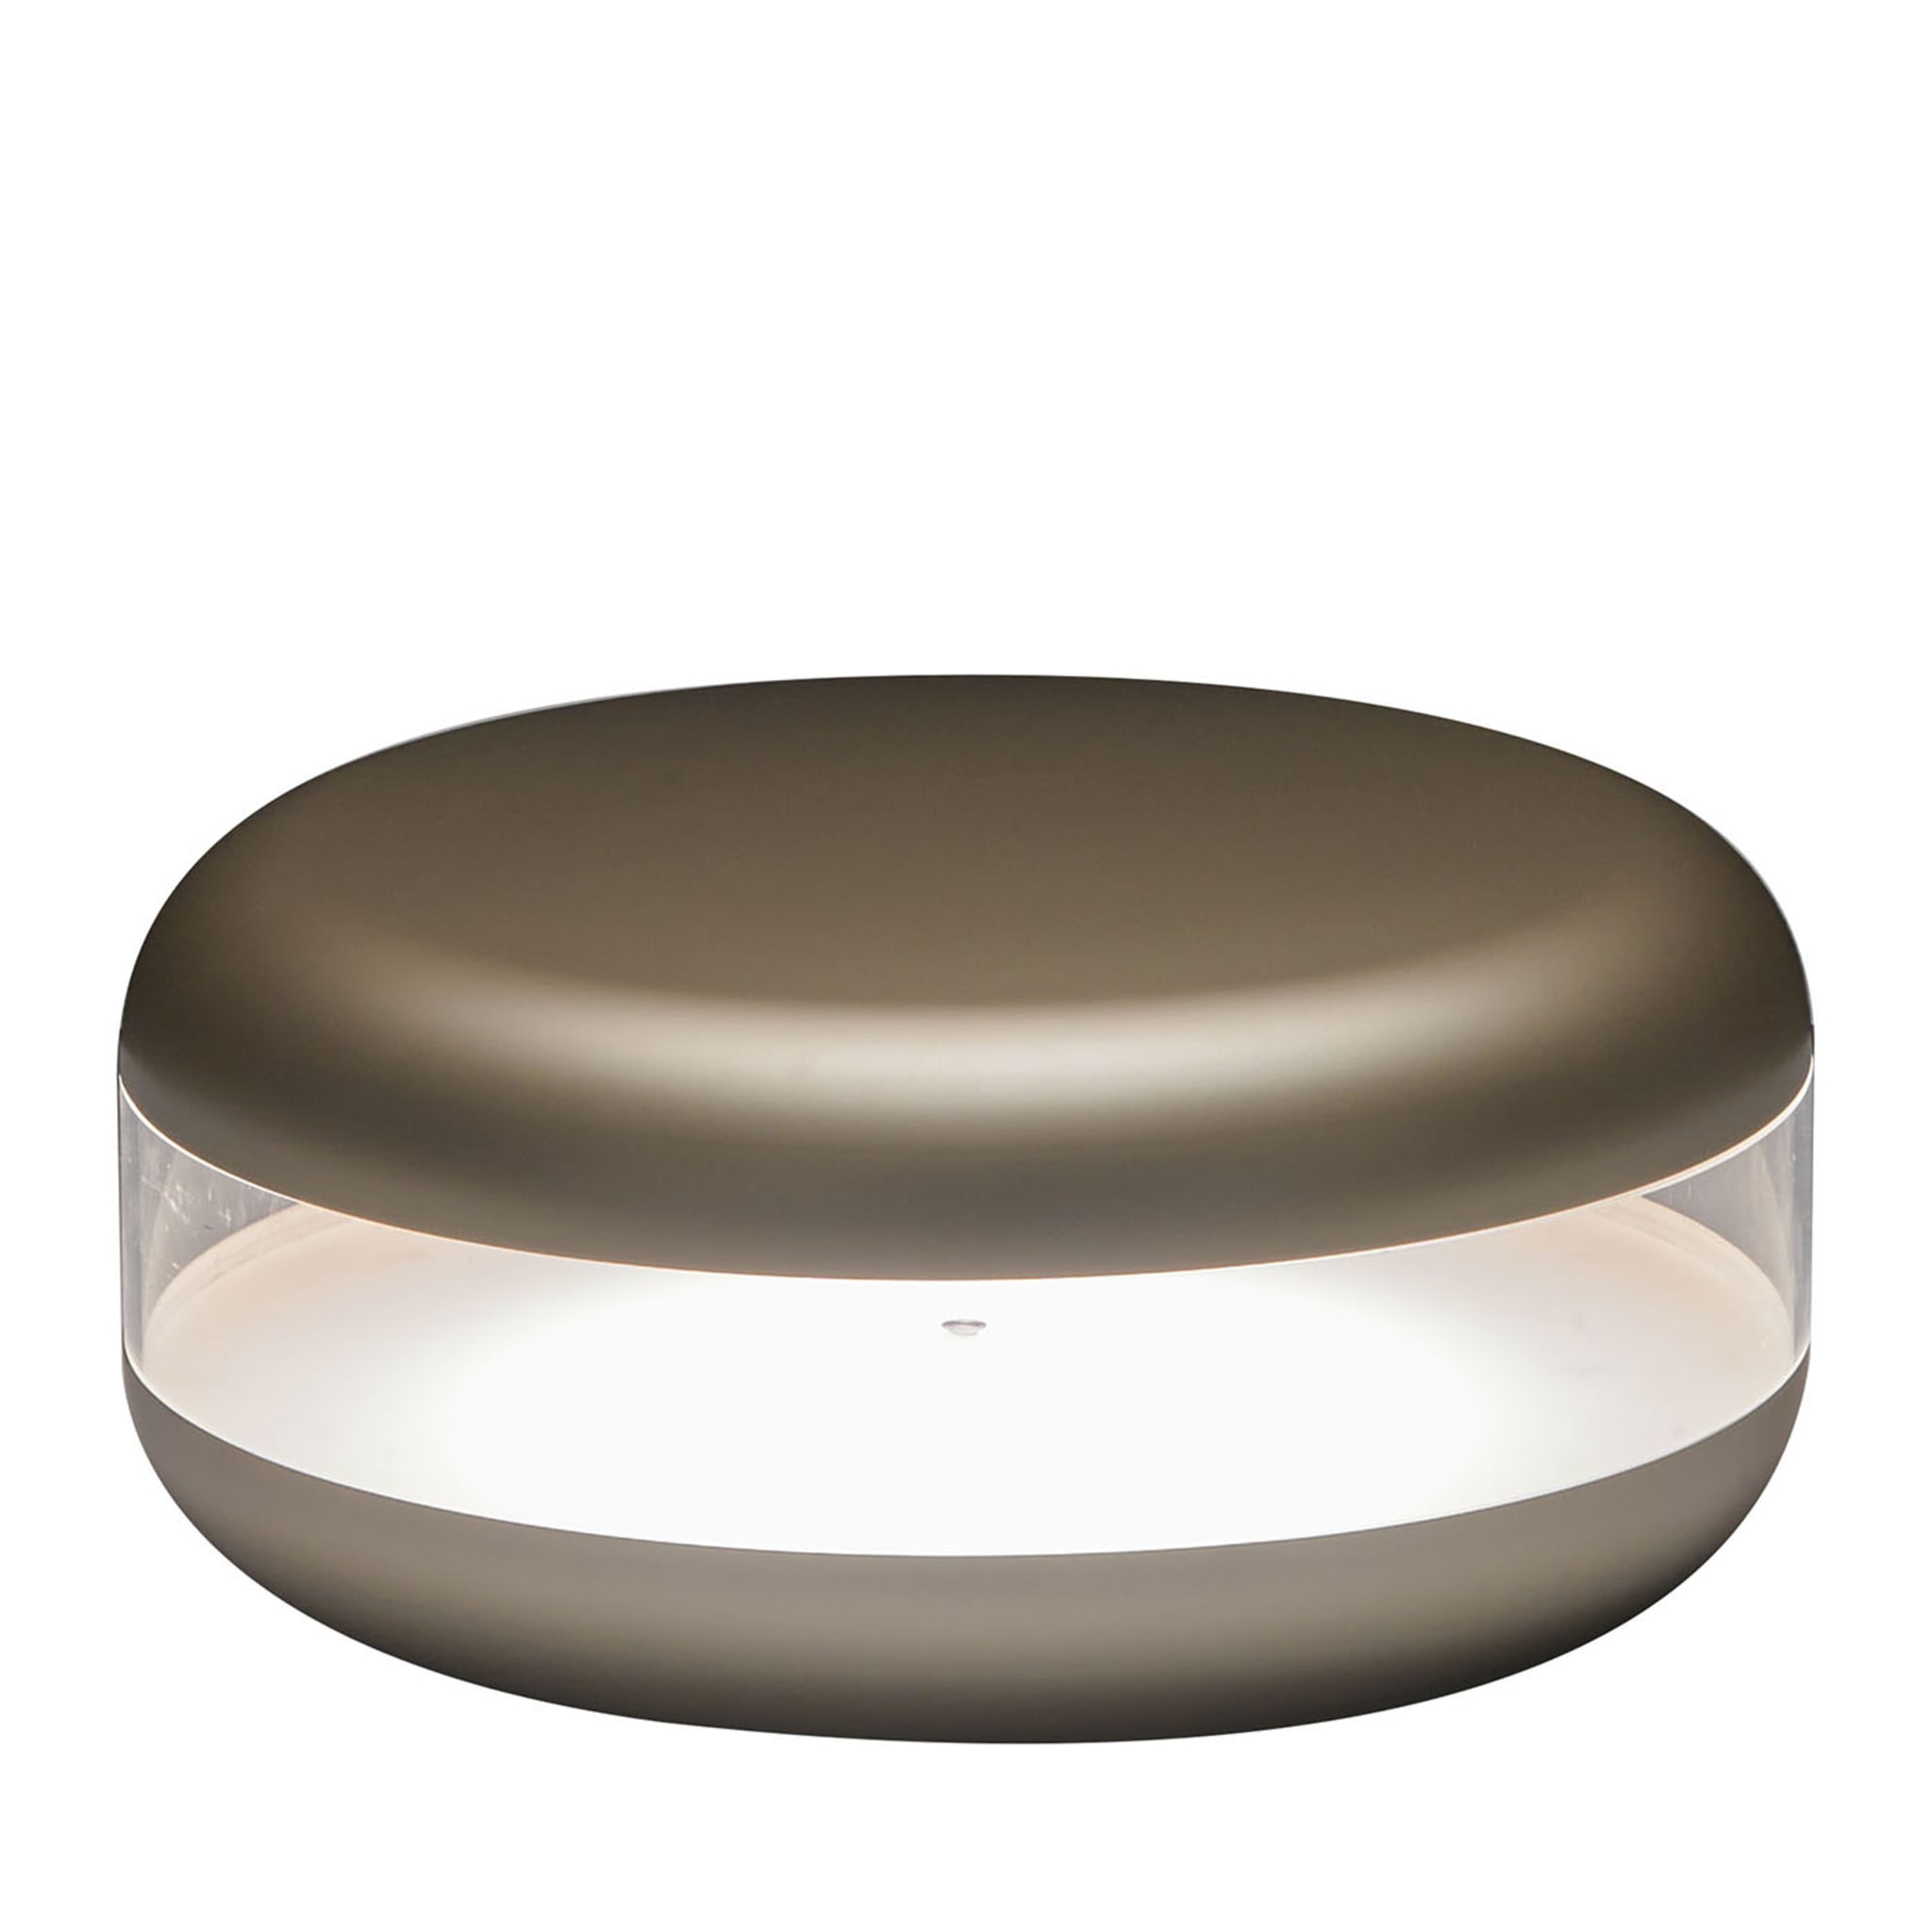 Macaron Brown Table Lamp by Parisotto + Formenton - Main view